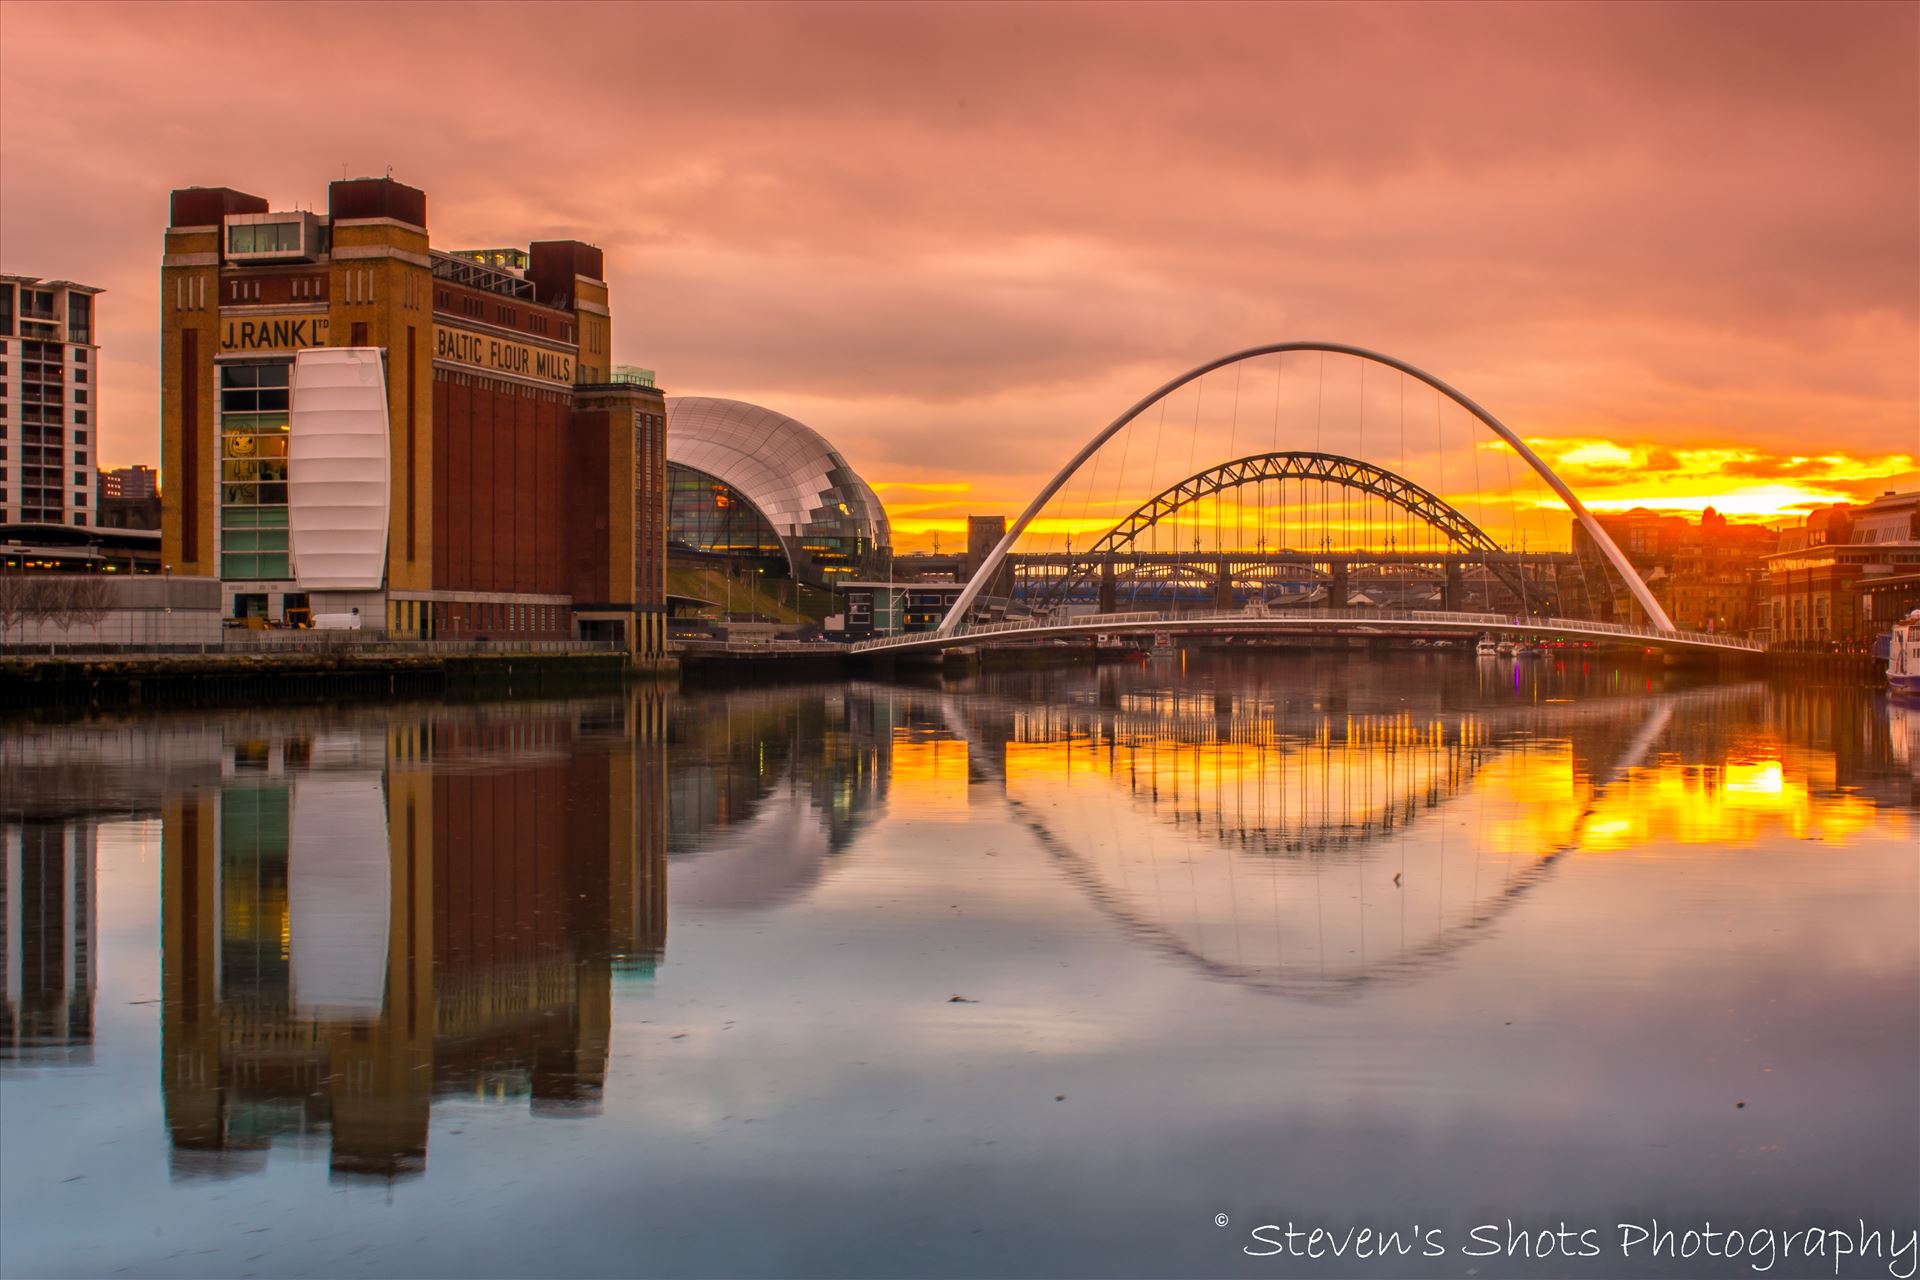 Sunset on the Tyne - A sunset on the River Tyne with the Baltic, Sage, Millennium Bridge and Tyne Bridge, also a good reflection in the water. by Steven's Shots Photography